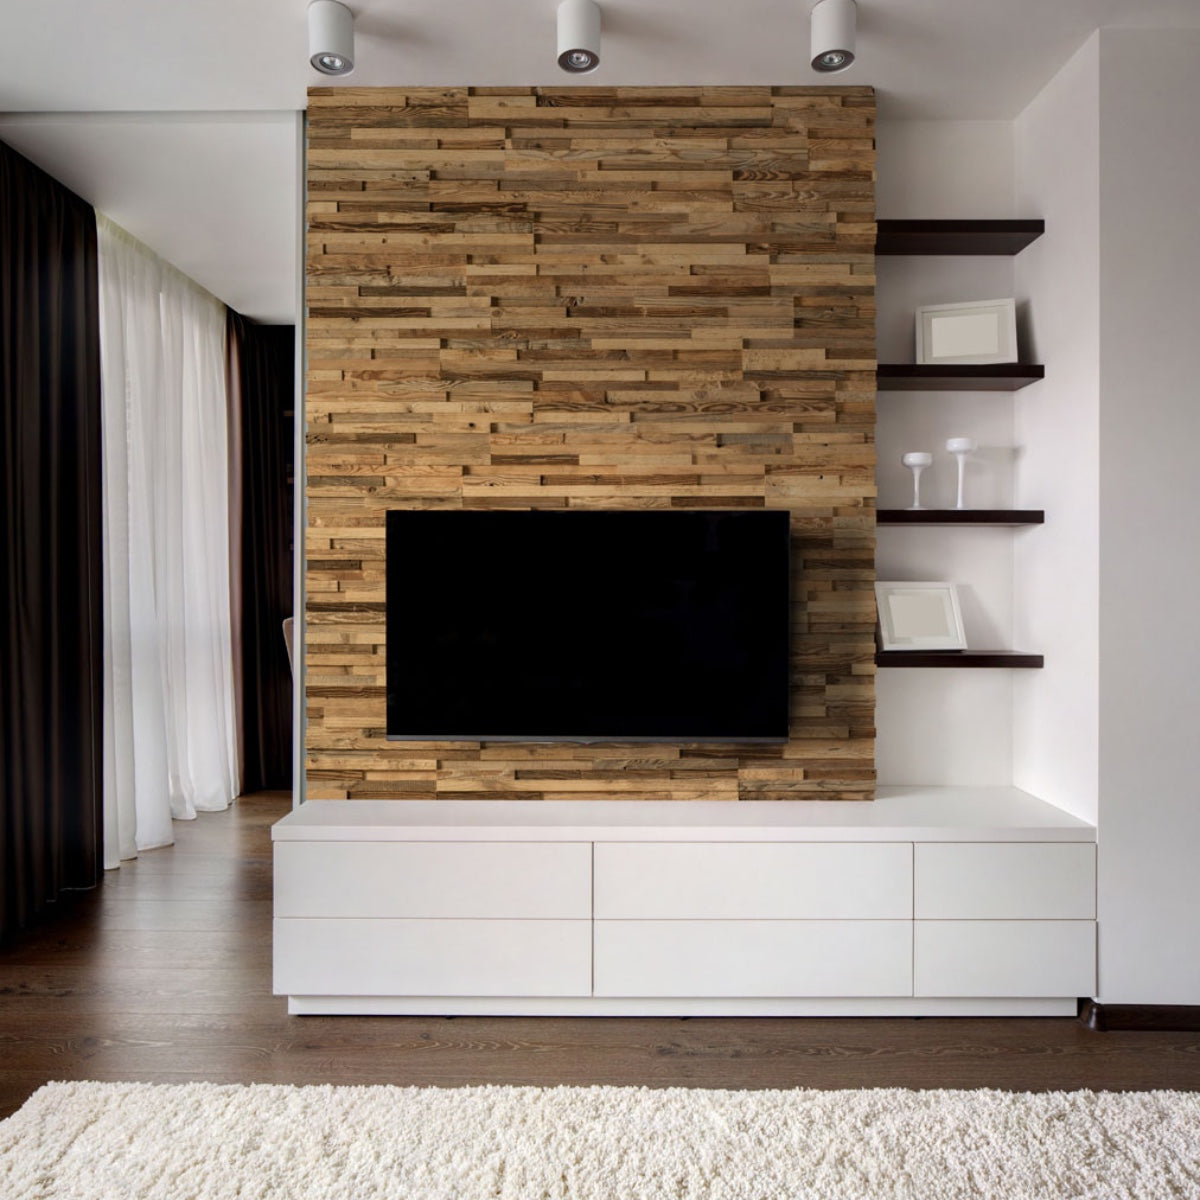 Reclaimed Wood Panelling A Priori